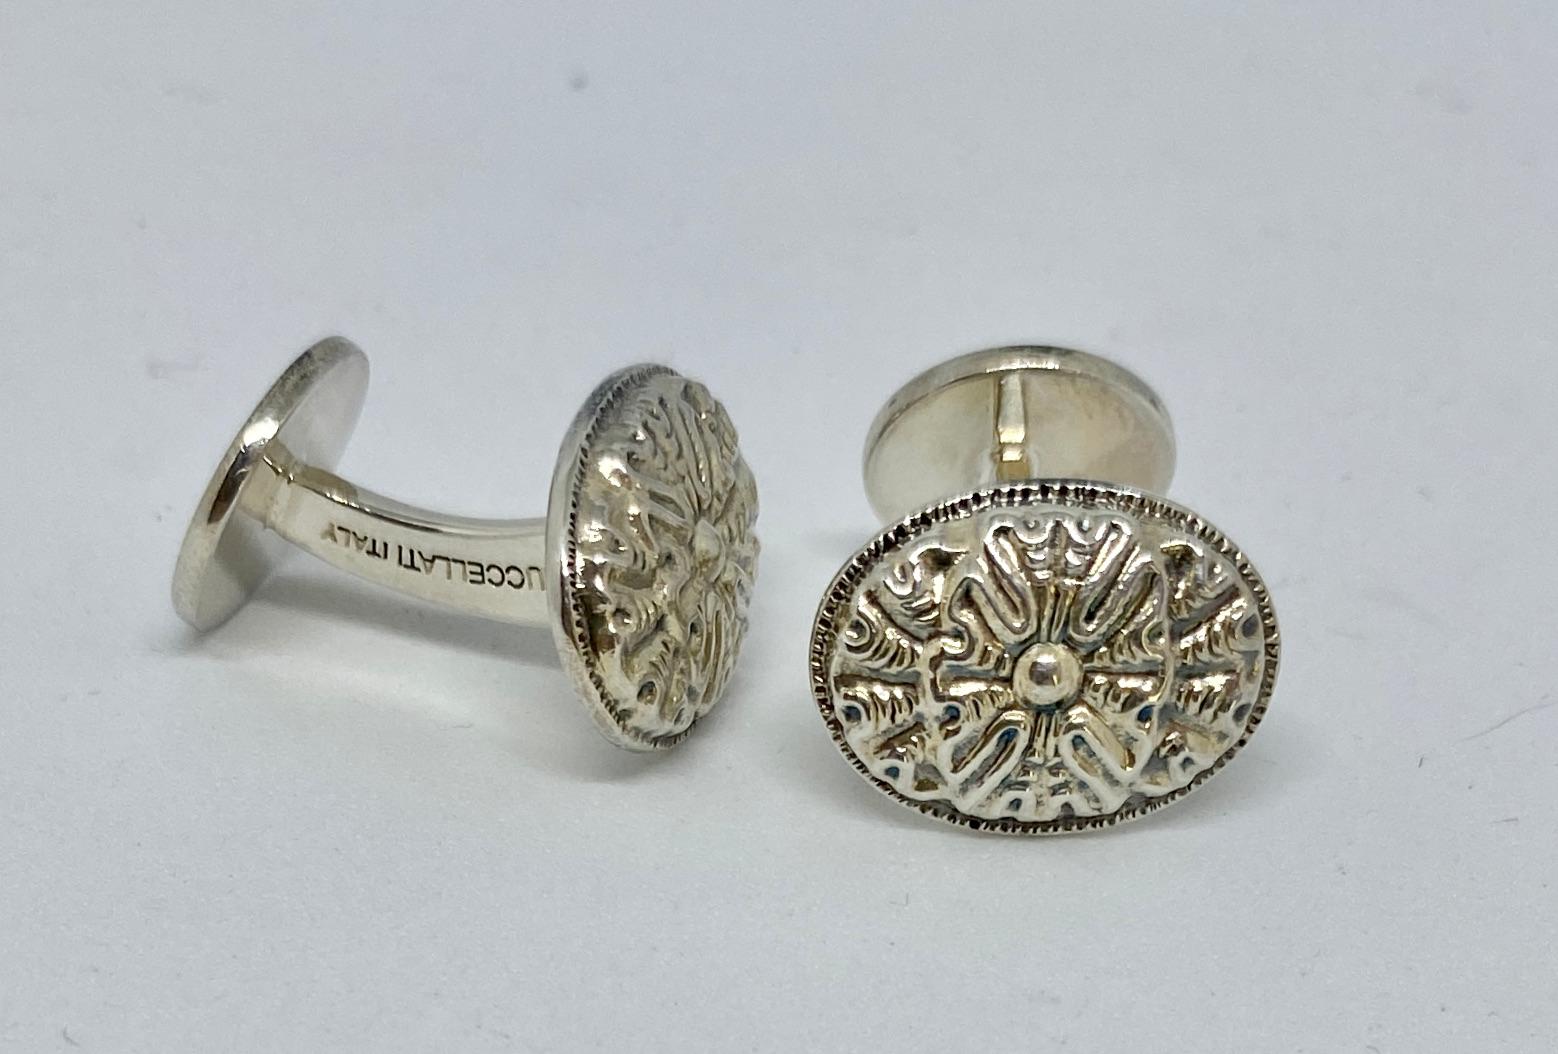 Unusual, oval-faced cufflinks in sterling silver by Gianmaria Buccellati.

The cufflink faces measure approximately 13 by 18 mm; the round backs are 13mm in diameter. Together the pair weighs 15.4 grams.

The cufflinks are signed BUCCELLATI,